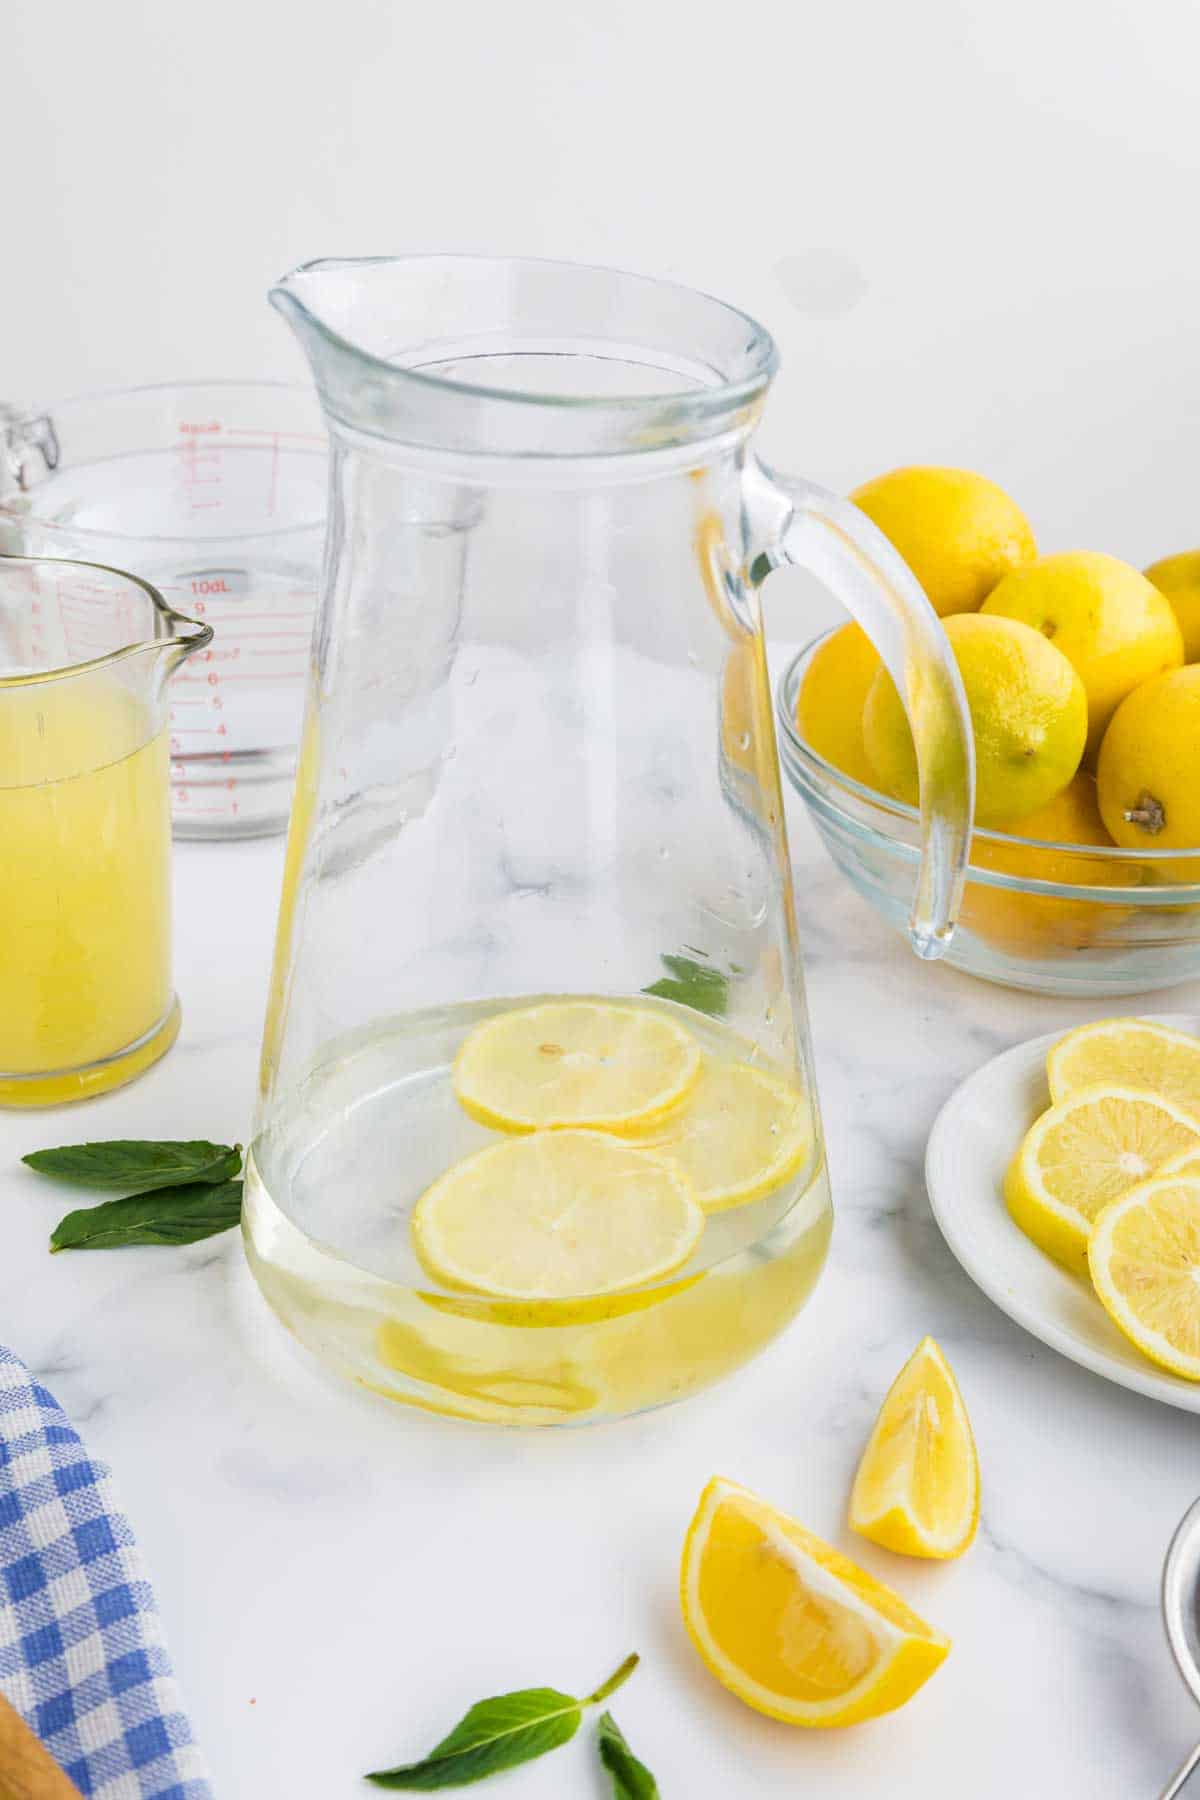 A pitcher of water with lemon slices, surrounded by ingredients and kitchenware.